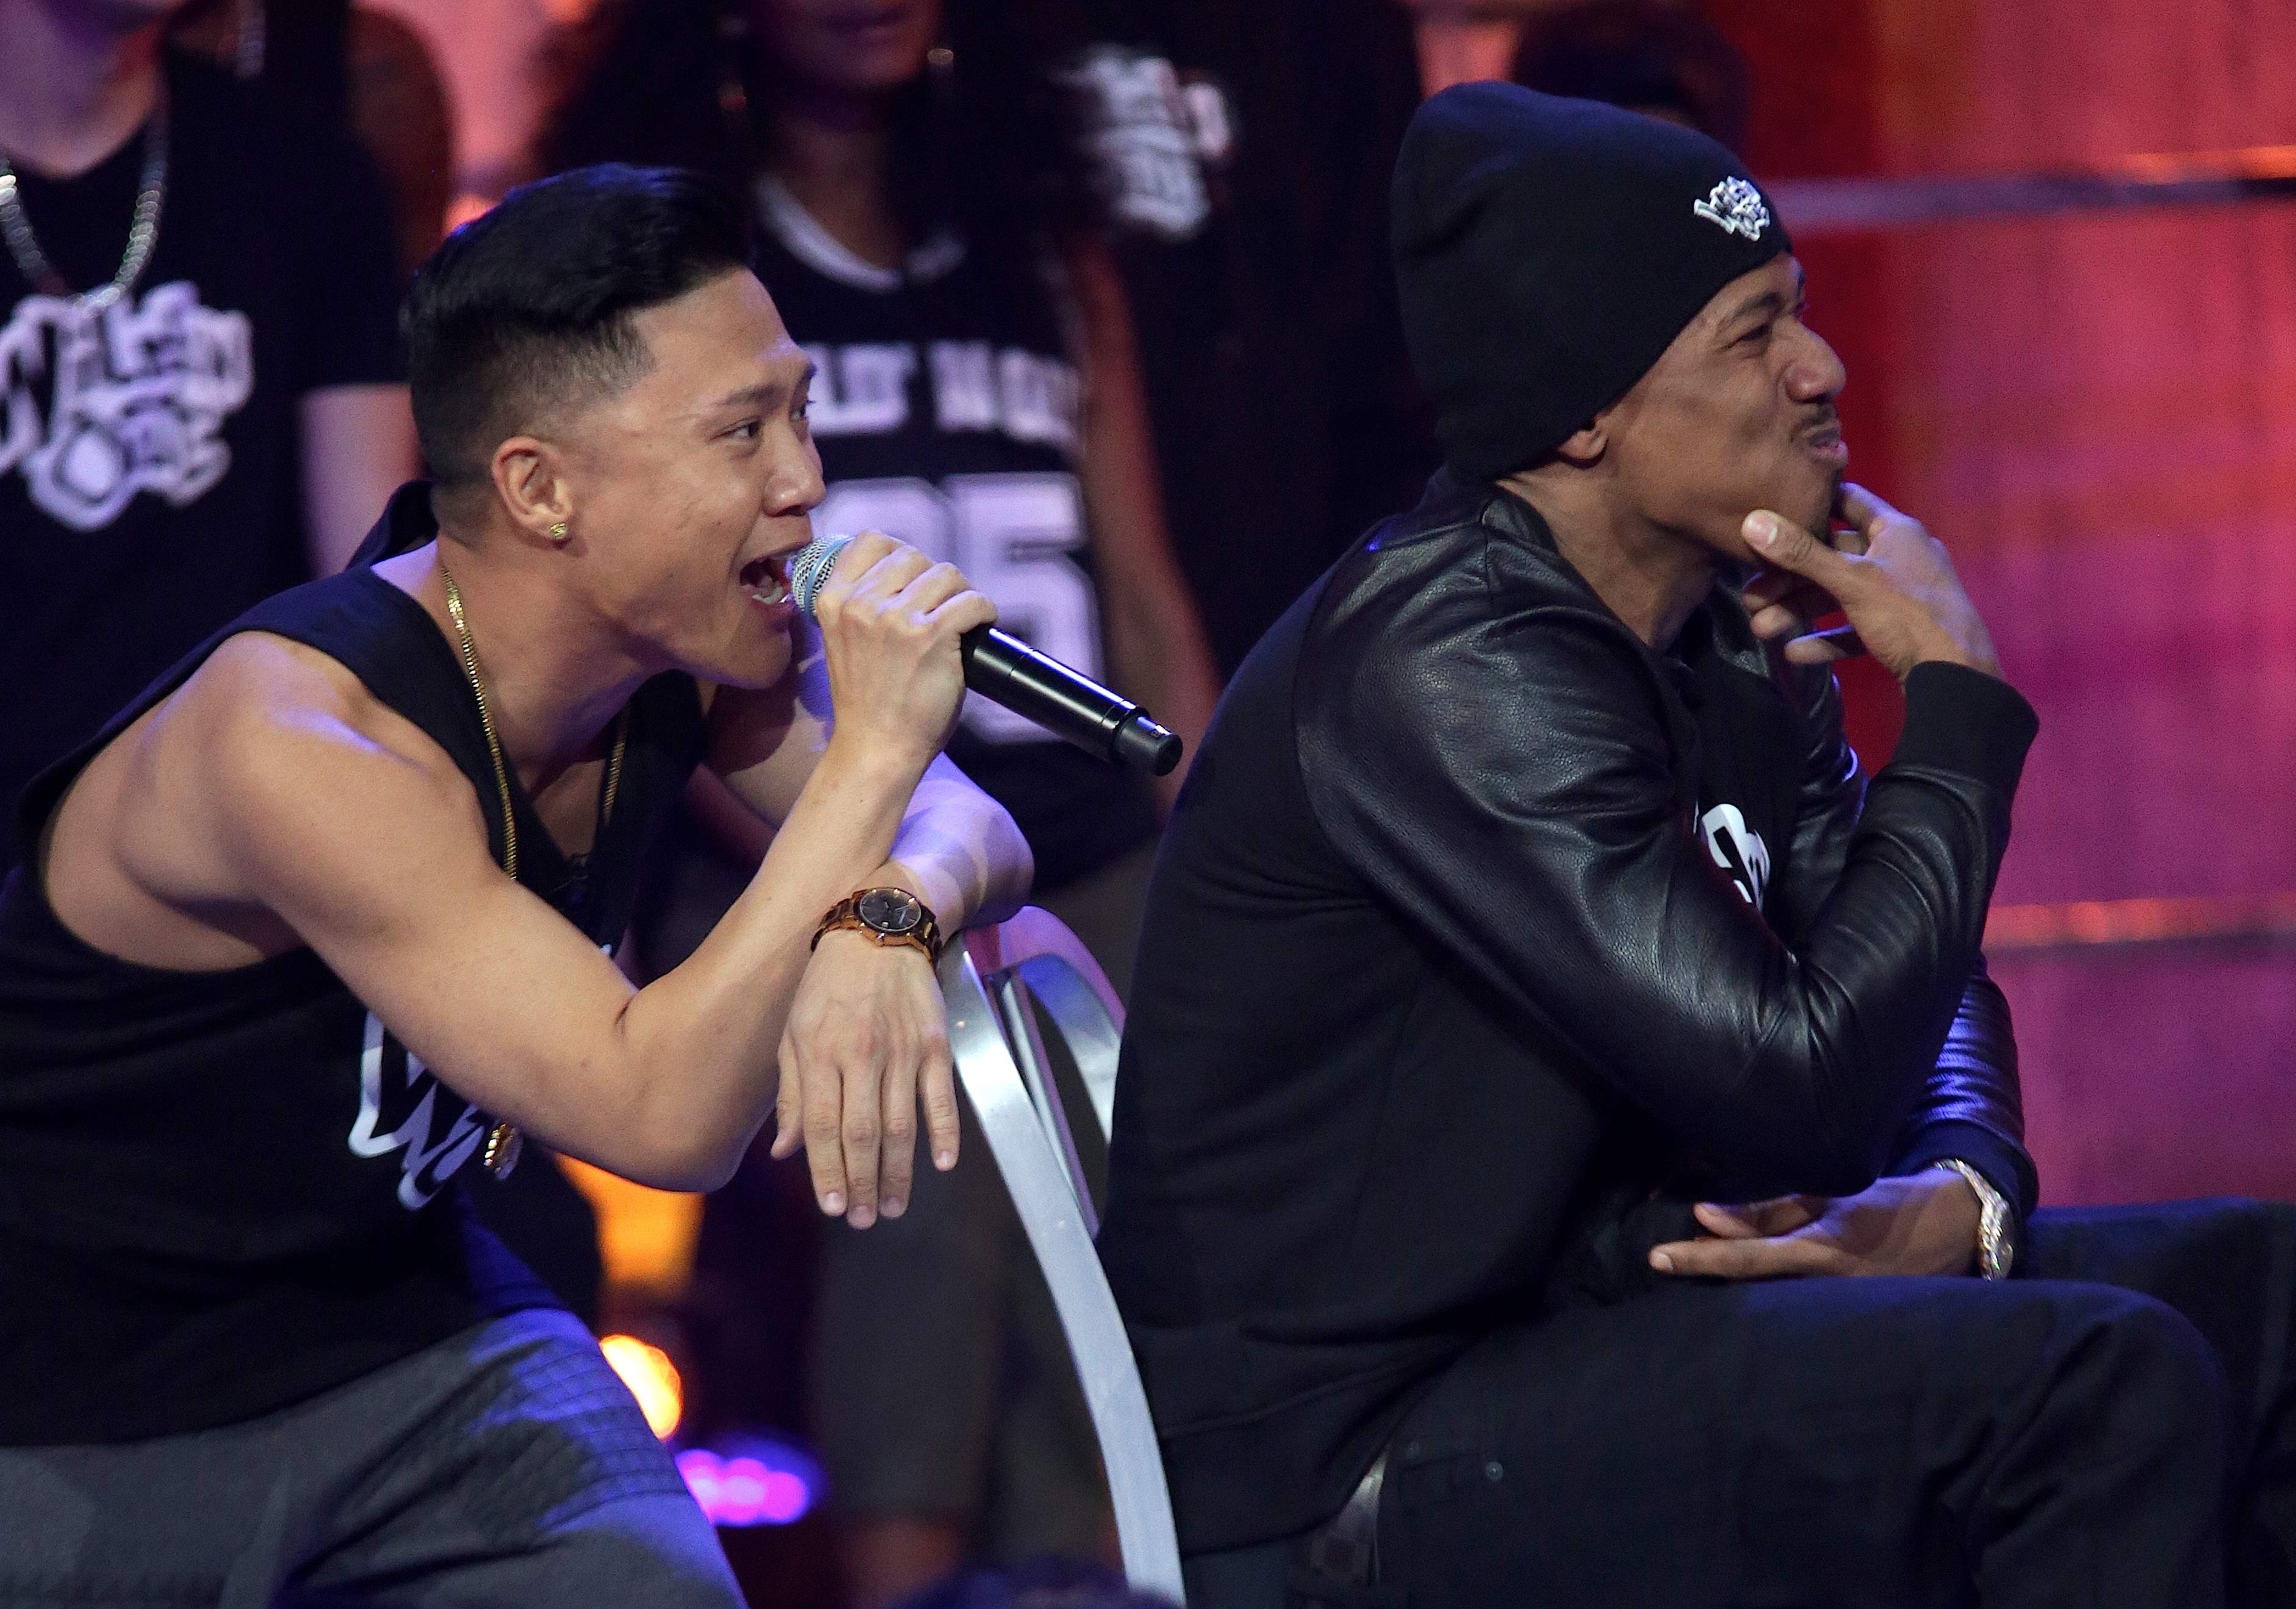 Makin the boss man laugh on another episode of Wildnout